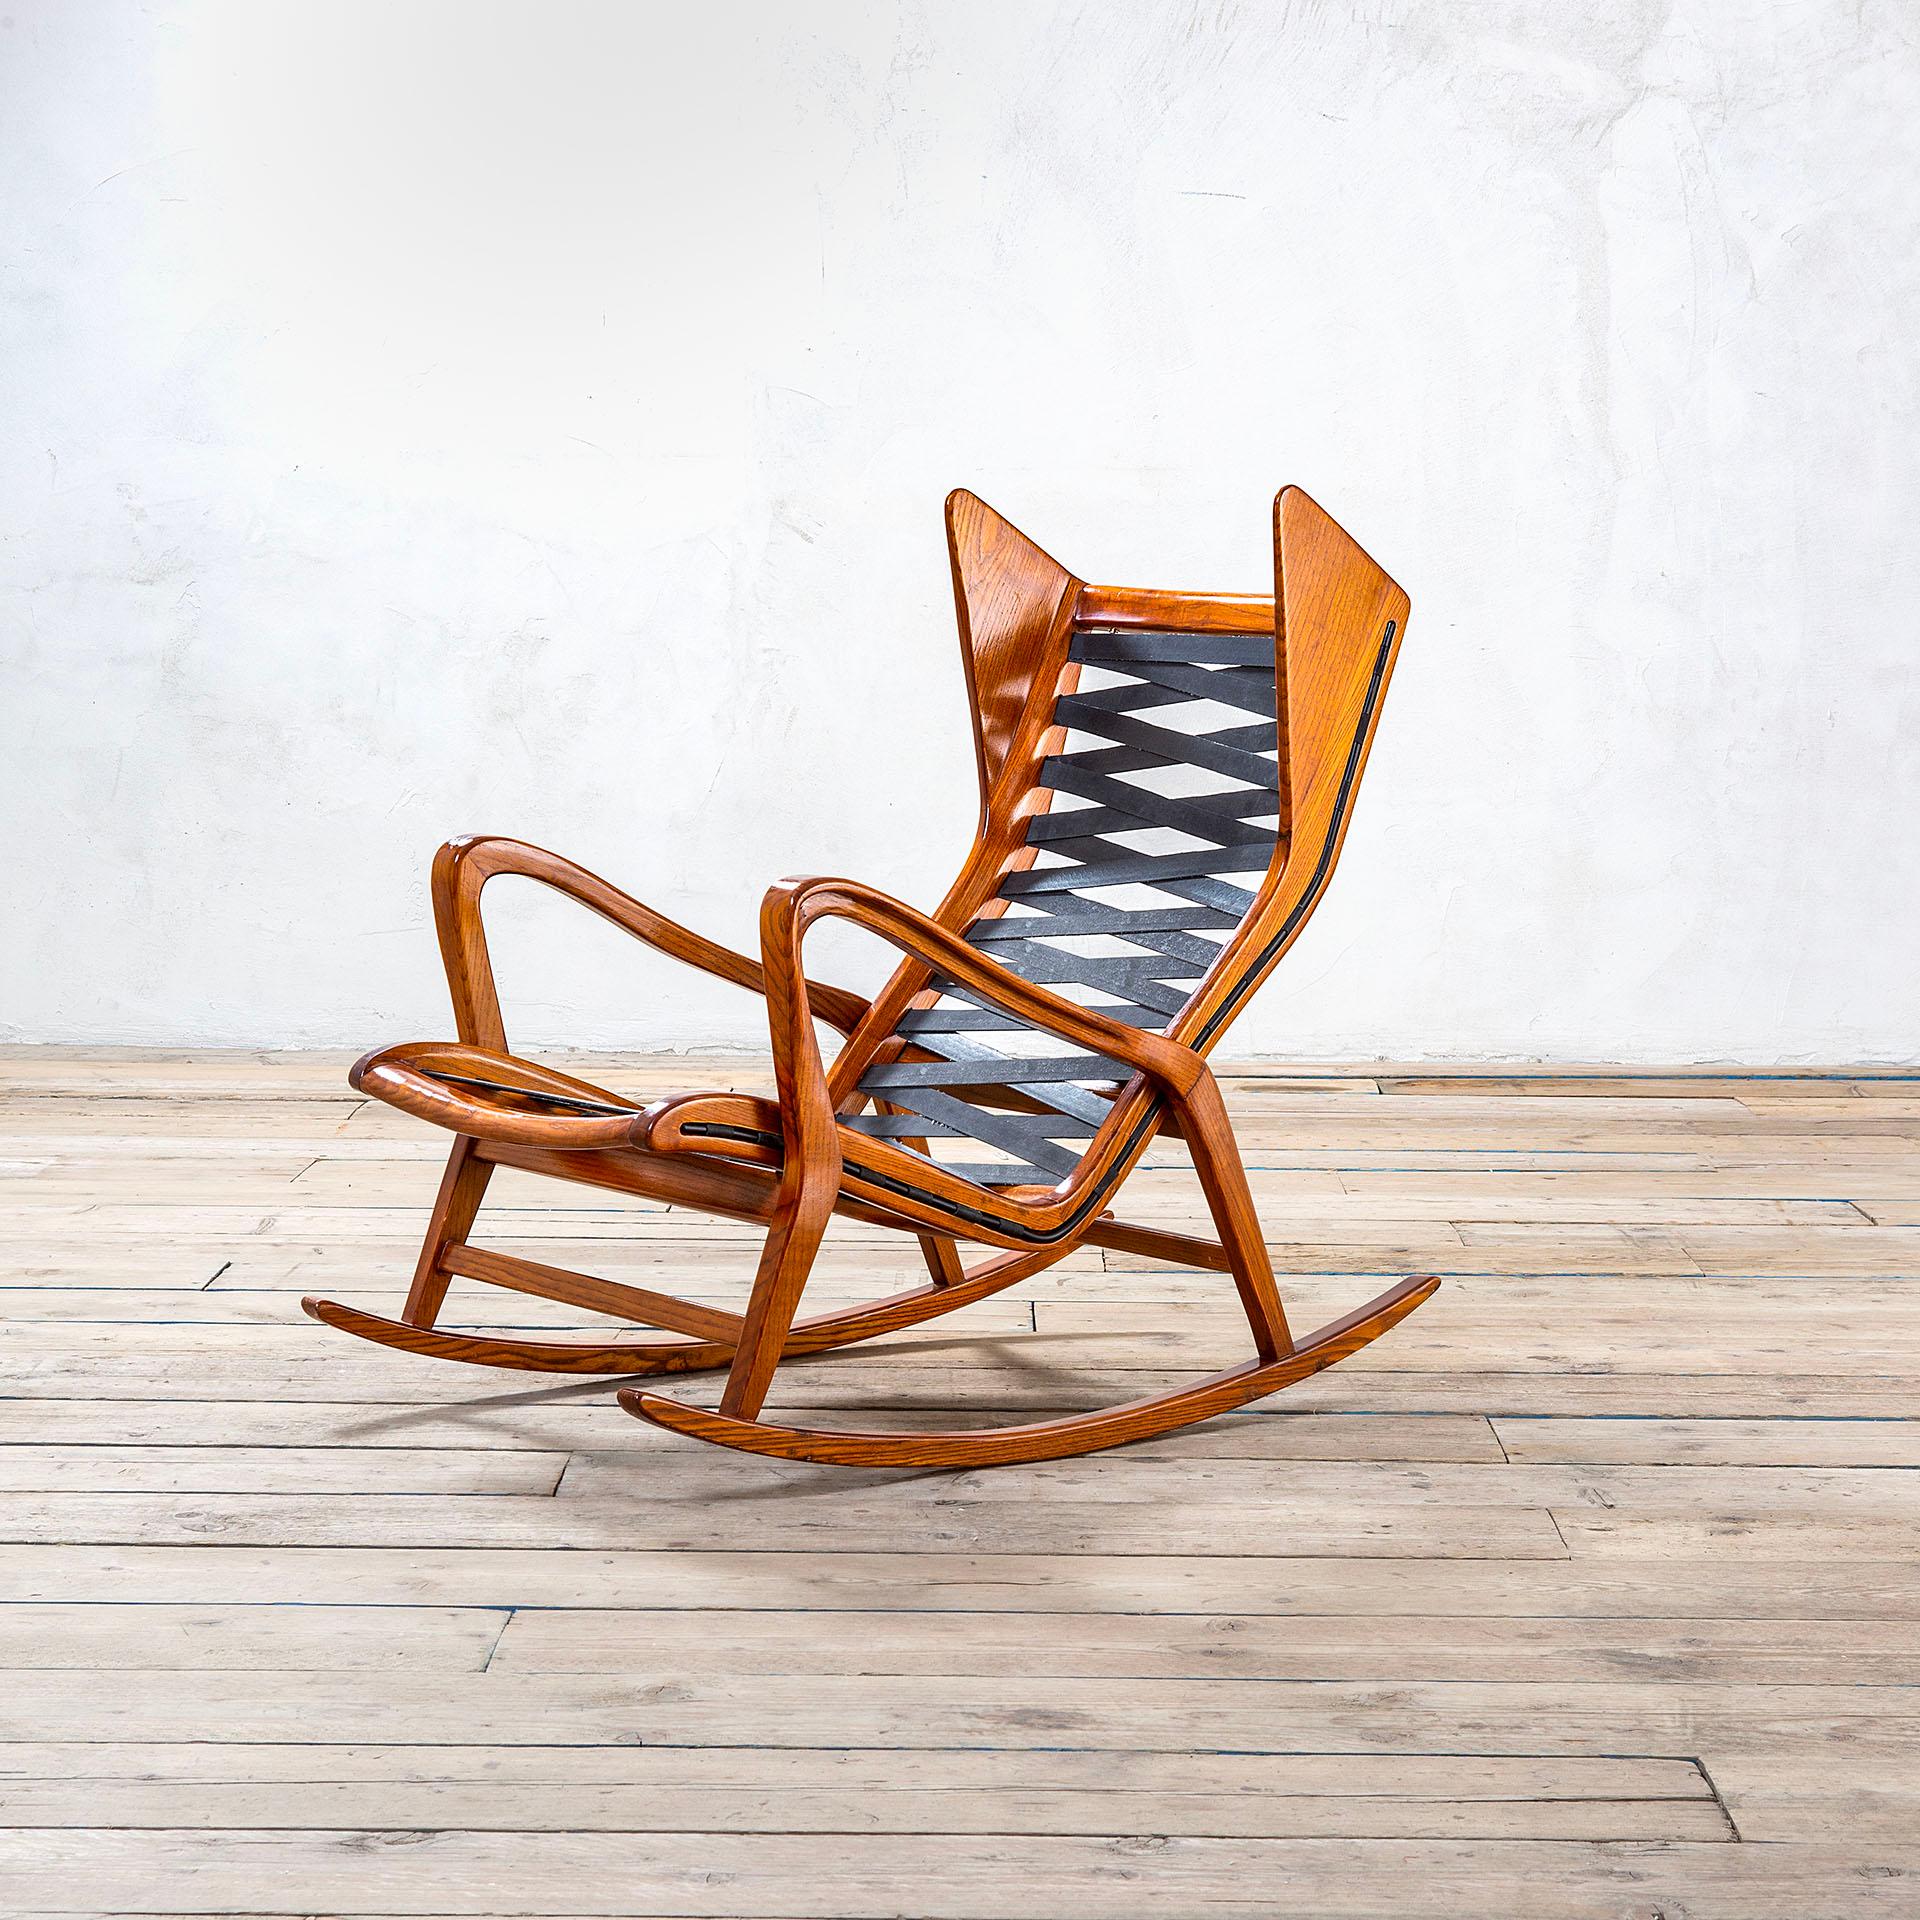 Italian 20th Century Cassina Rocking Chair mod. 572 in Wood and Fabric, 1950s For Sale